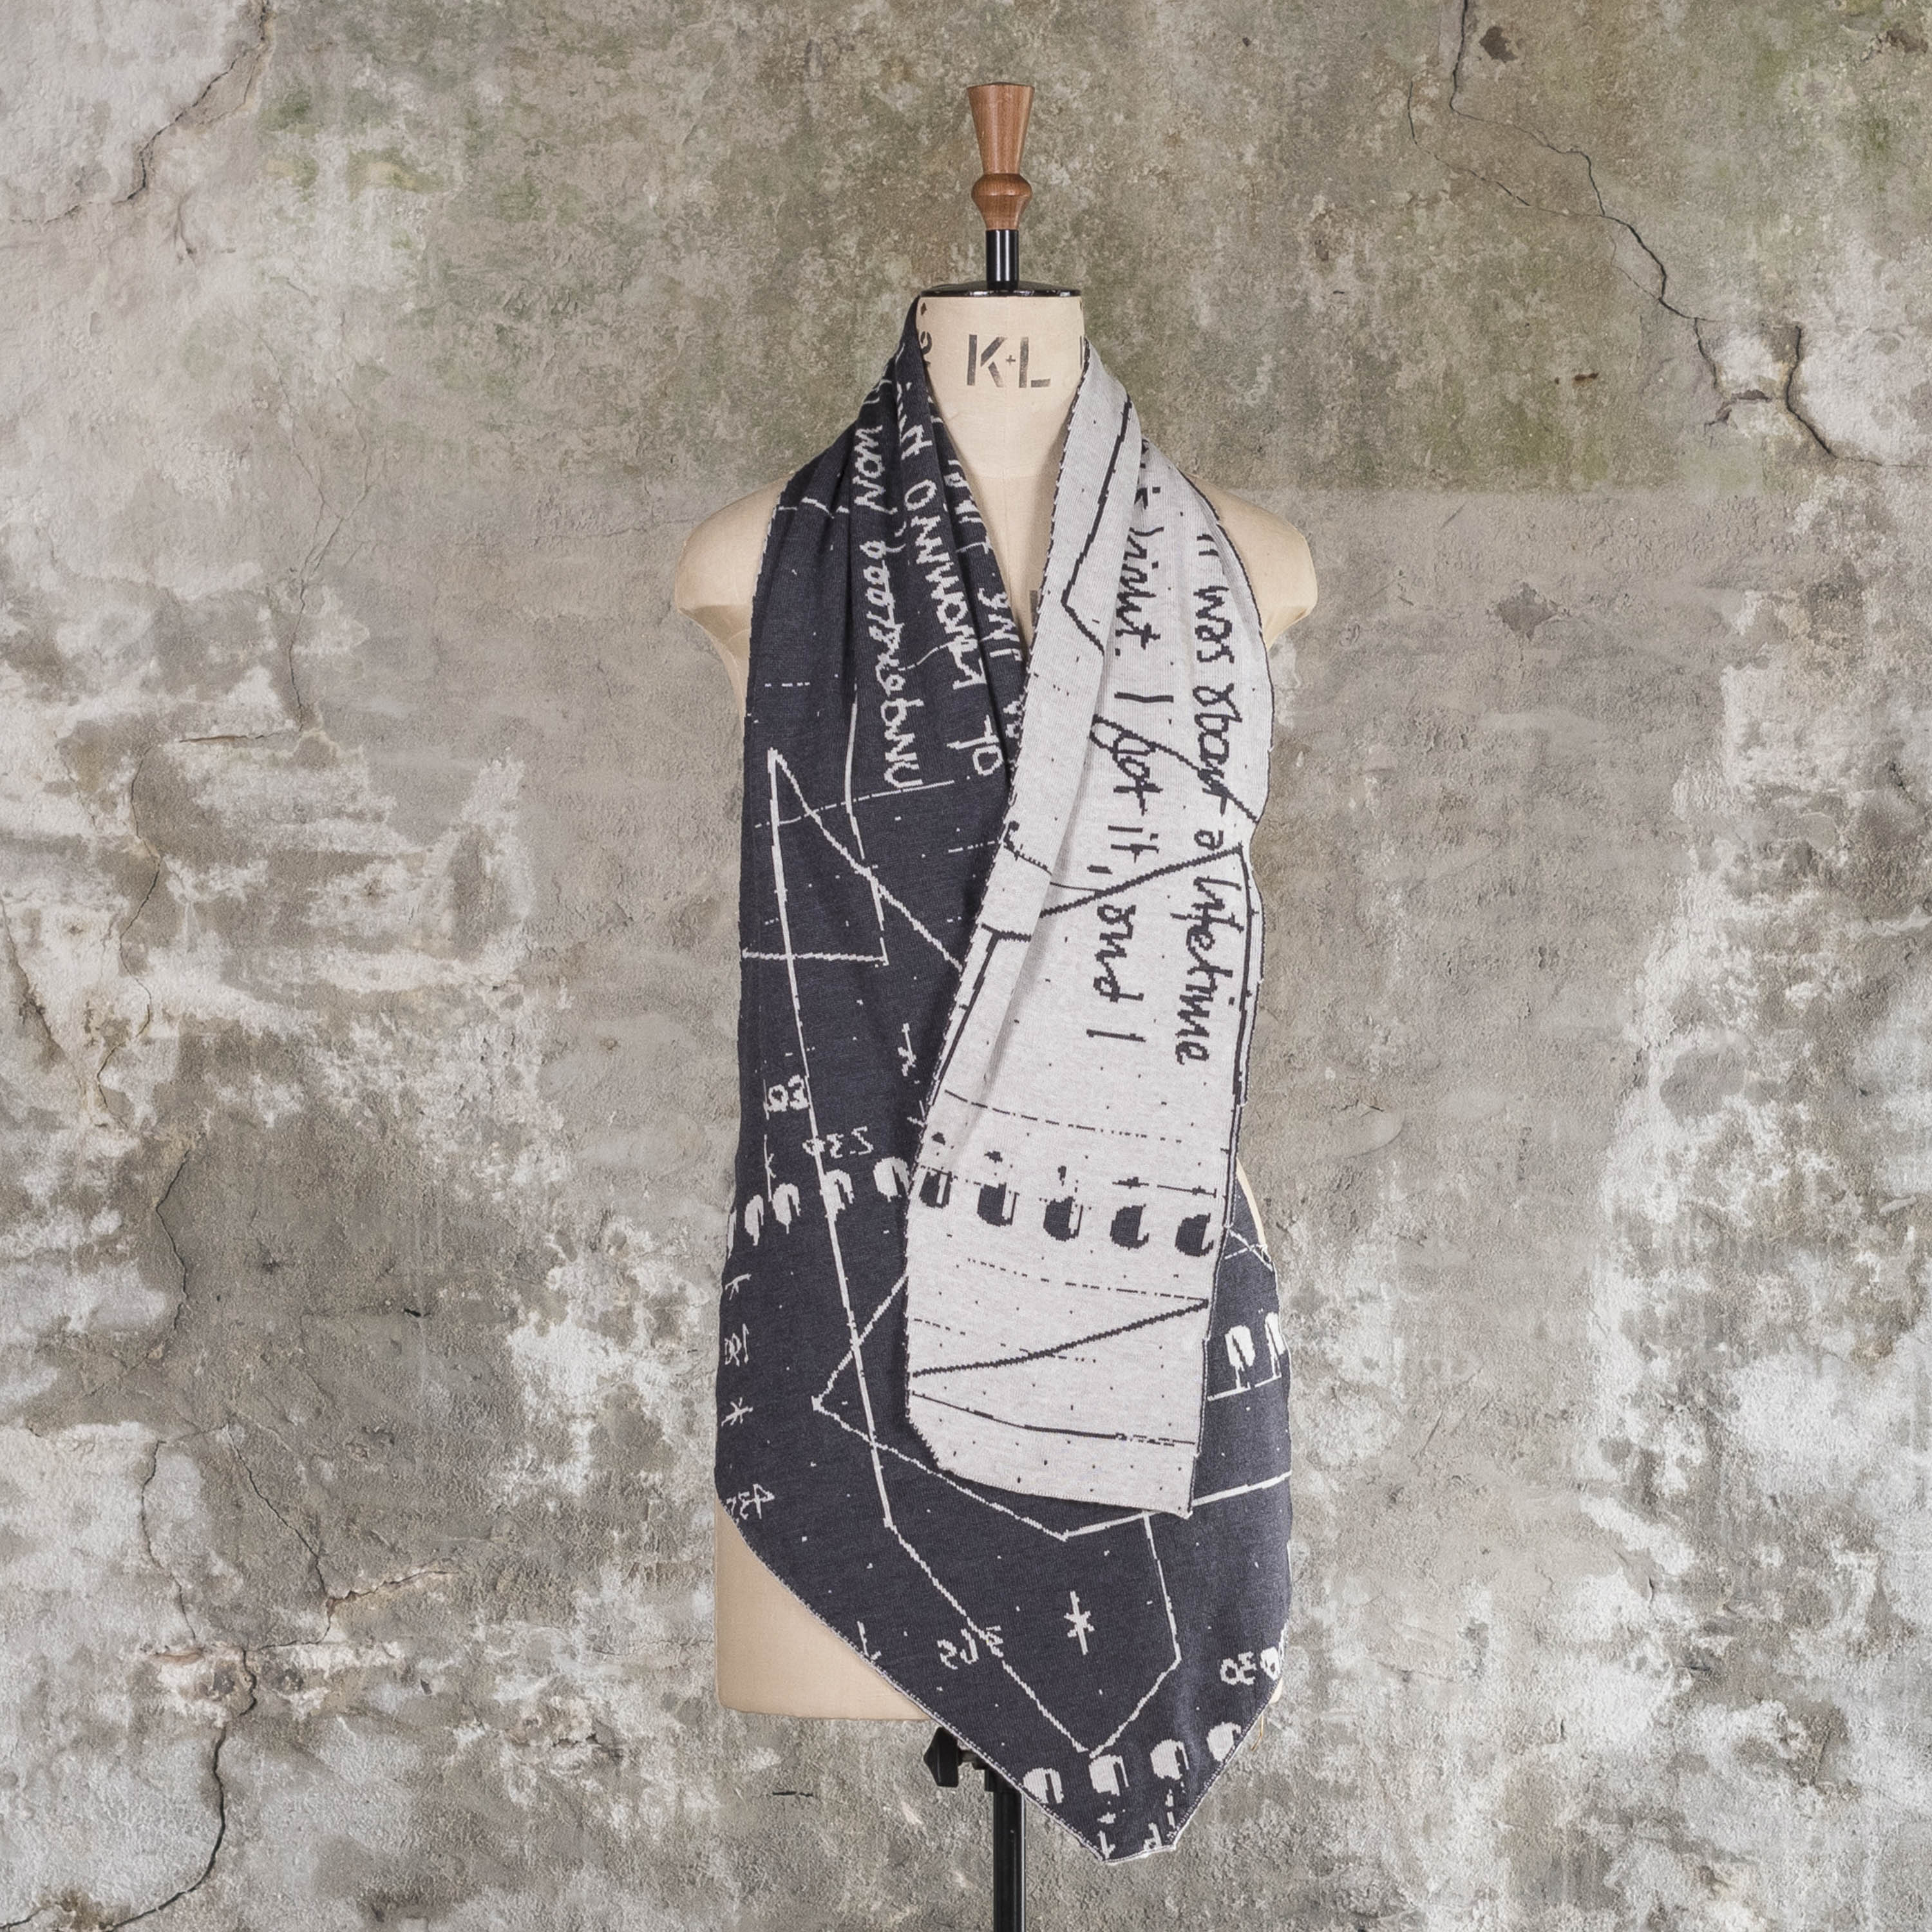 Contemporary, irregular shaped scarf with abstract pattern, knitted in charcoal grey and stone white. Shown on vintage mannequin against Shetland rustic wall.